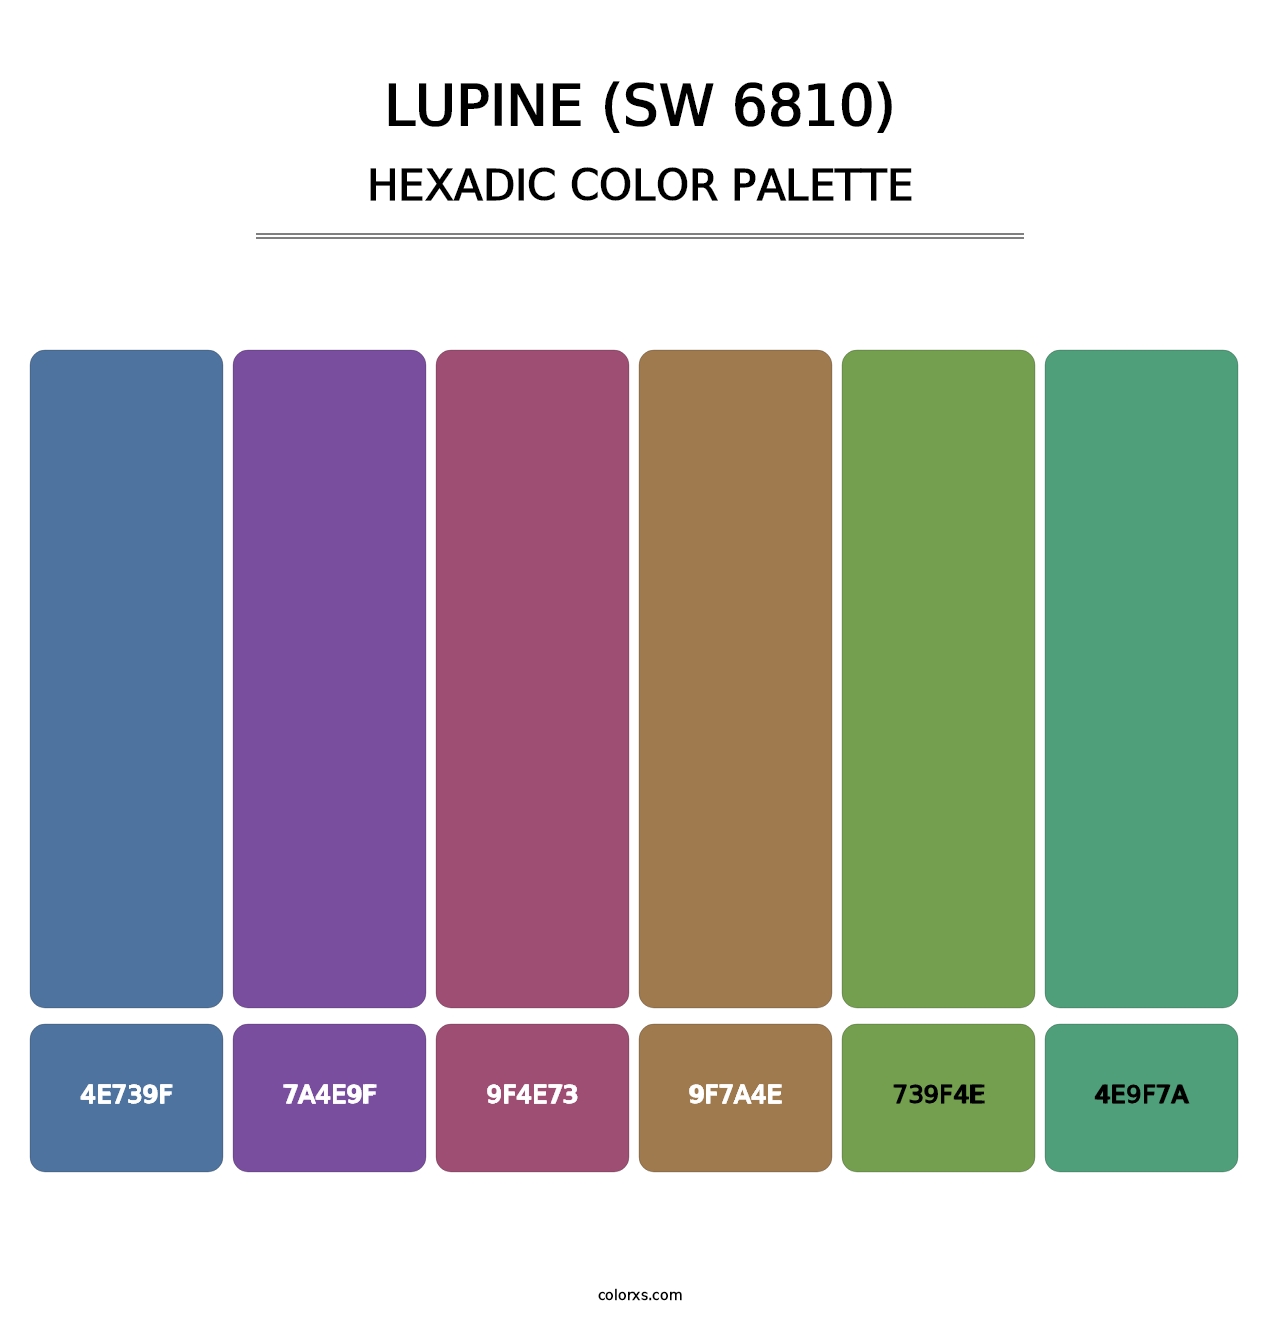 Lupine (SW 6810) - Hexadic Color Palette